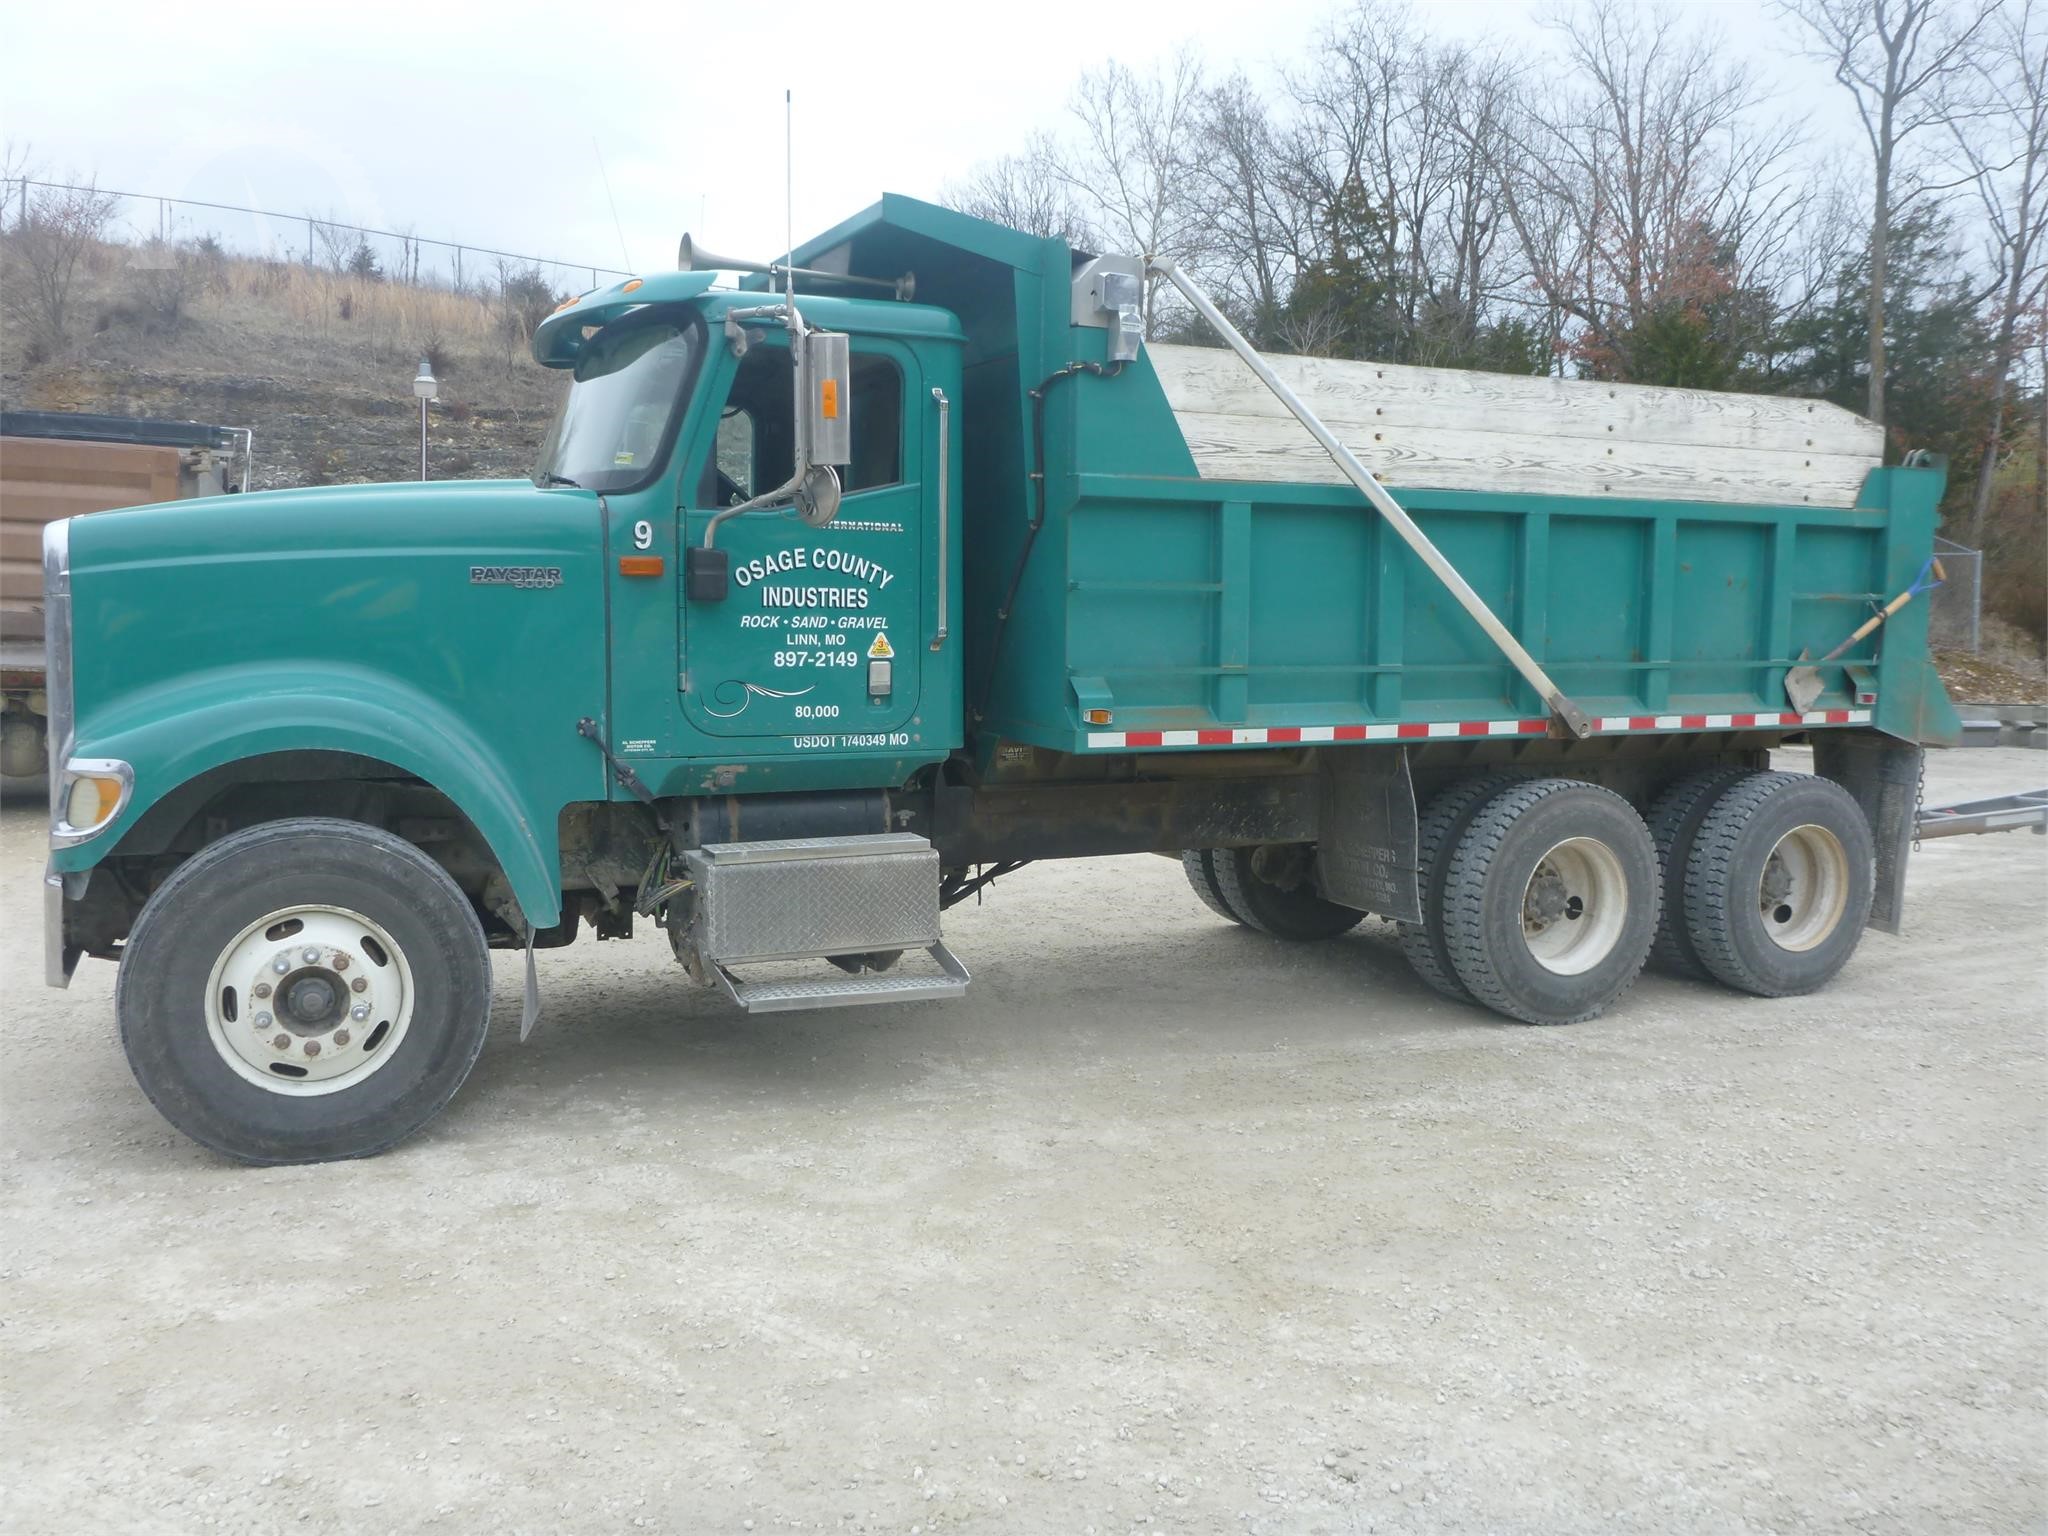 Dump Trucks Online Auctions In Missouri - 12 Listings  -  Page 1 of 1